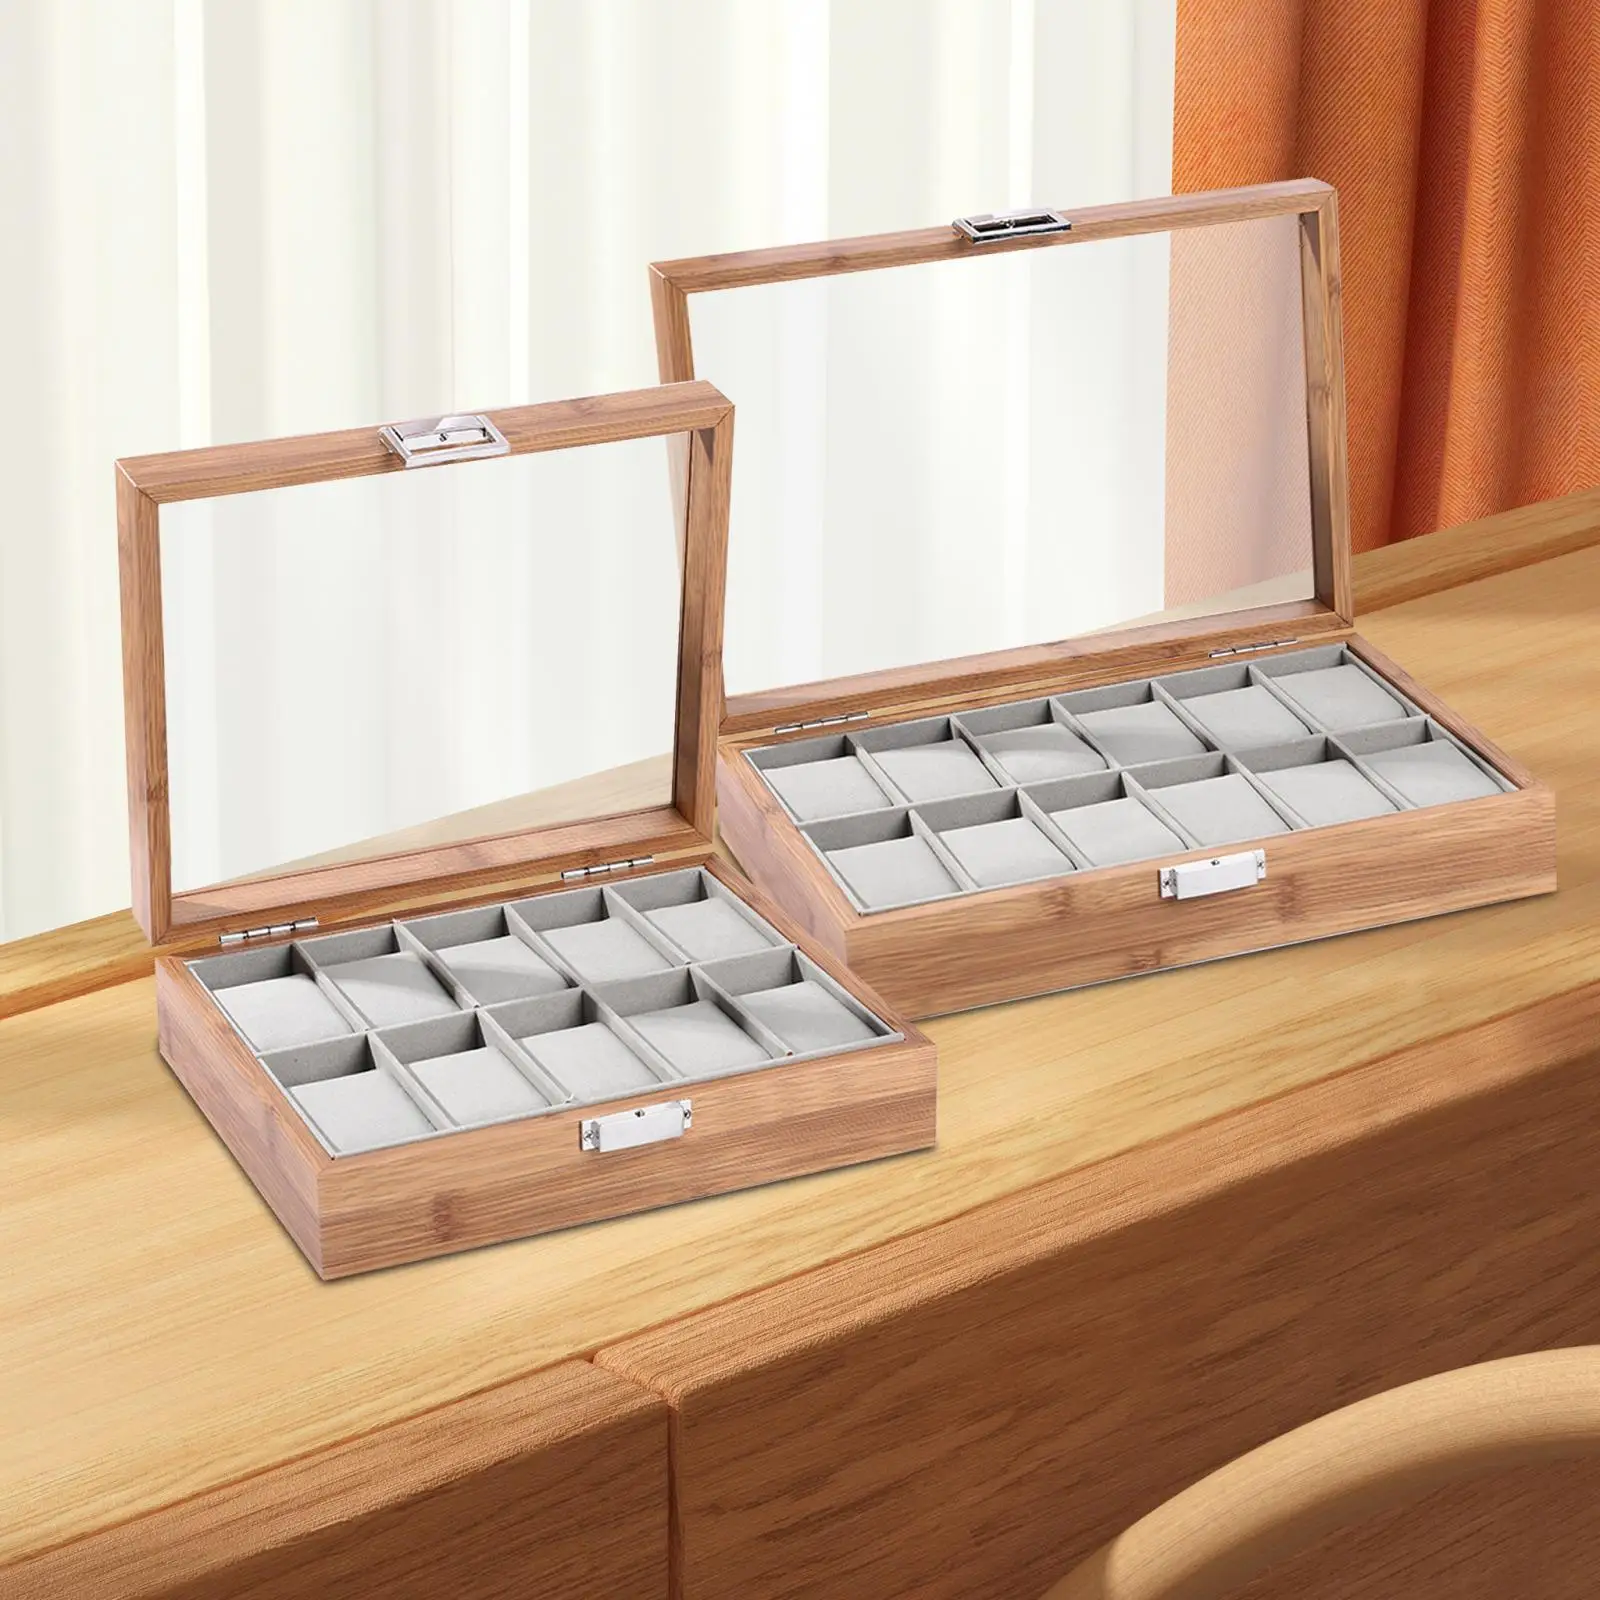 Watch Storage Box Portable Luxury Wooden Watches Box for Shop Display Home Decor Table Dresser Watches Jewelry Display Men Women